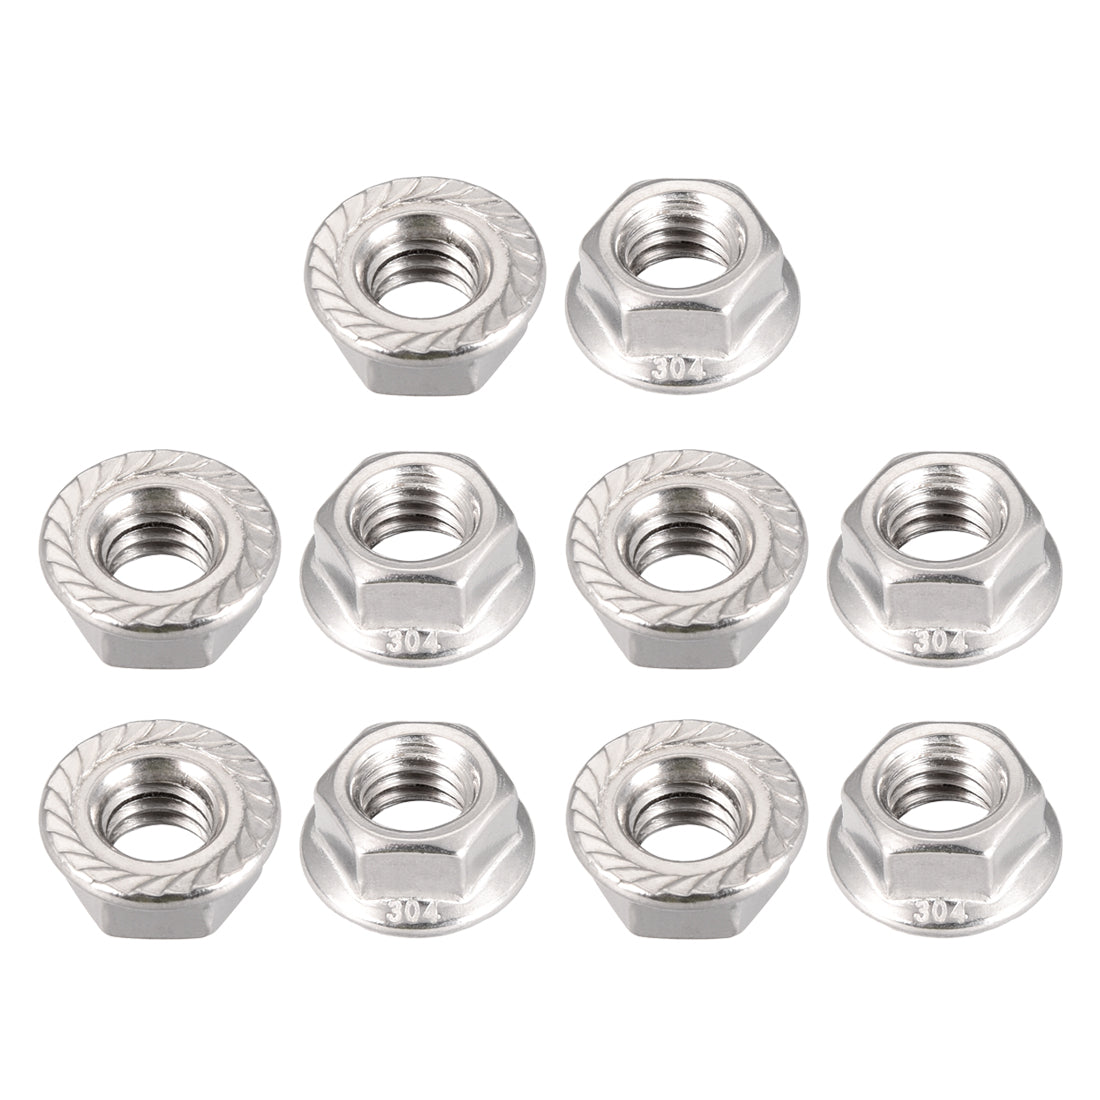 Uxcell Uxcell 1/4-20 Serrated Flange Hex Lock Nuts, 304 Stainless Steel, 10 Pcs